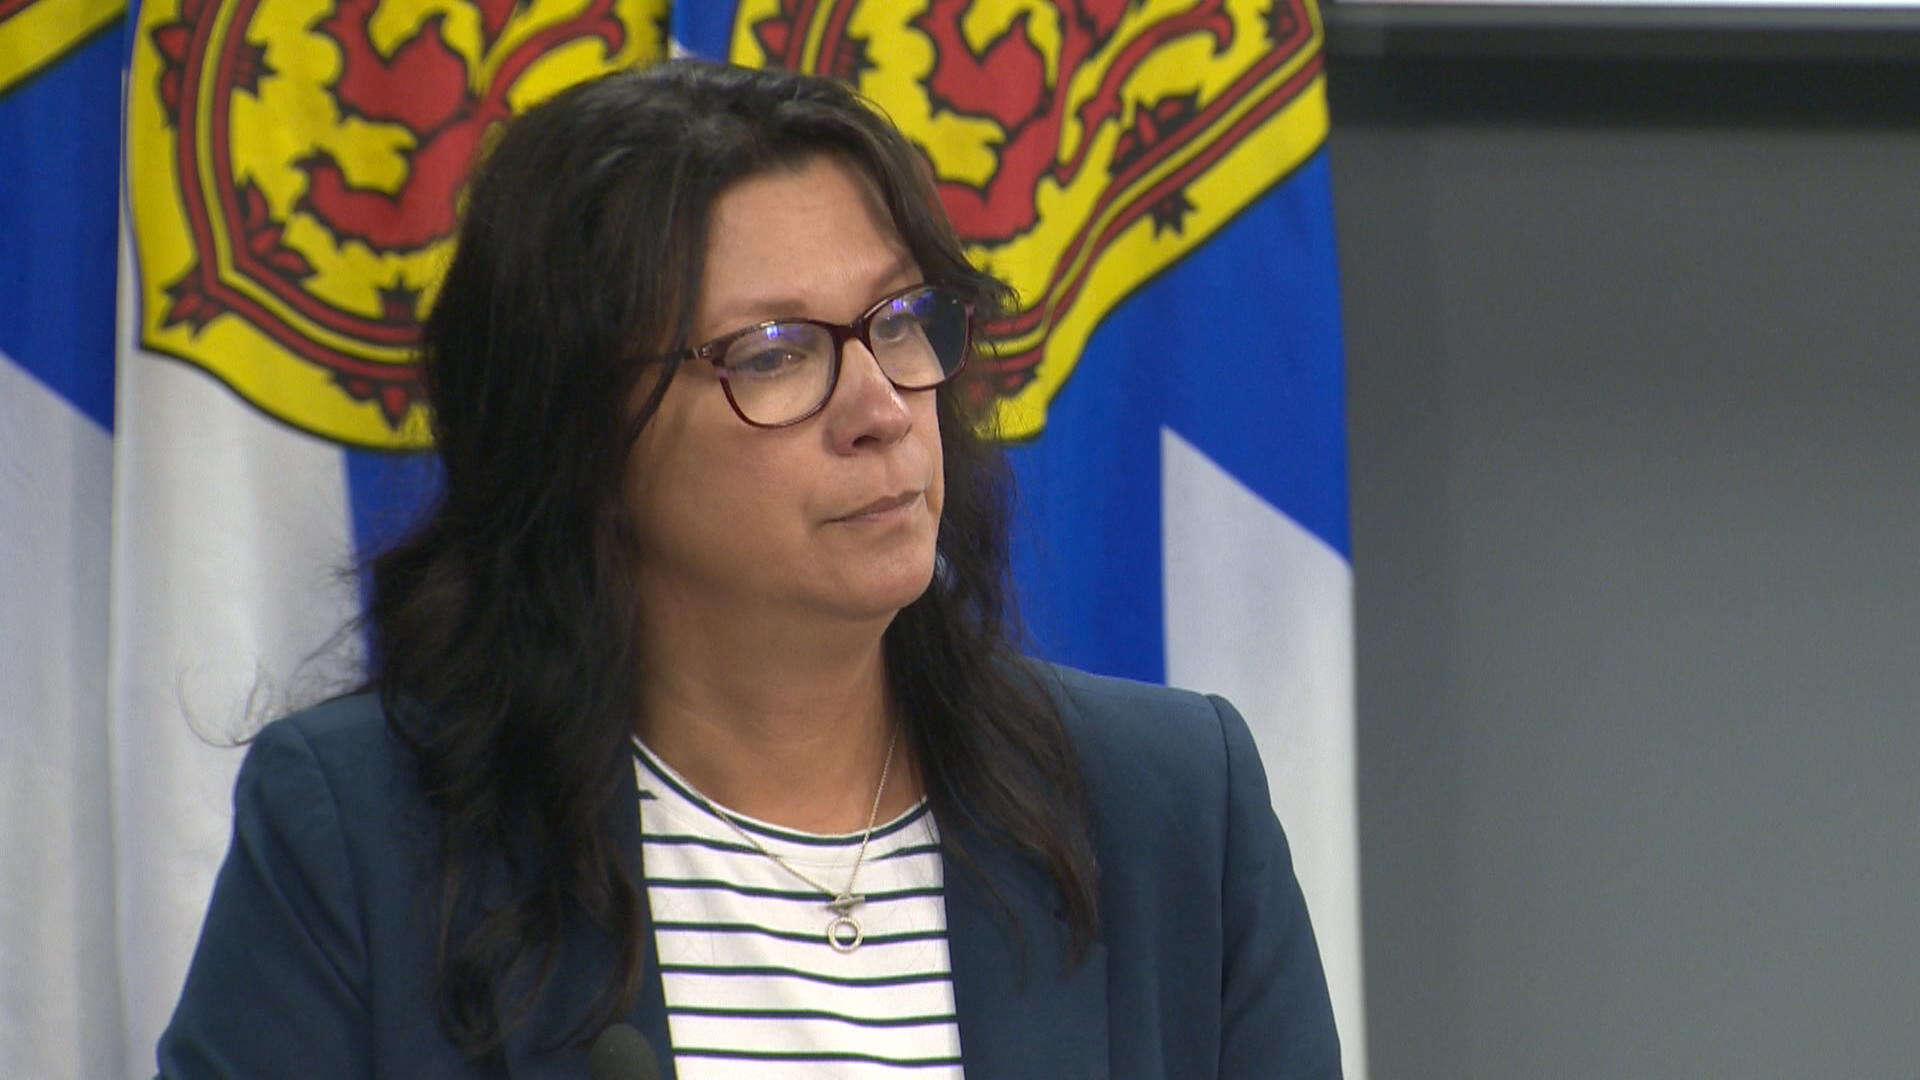 Looking for a family doctor in N.S.? You may need to ‘stretch’: Health Minister